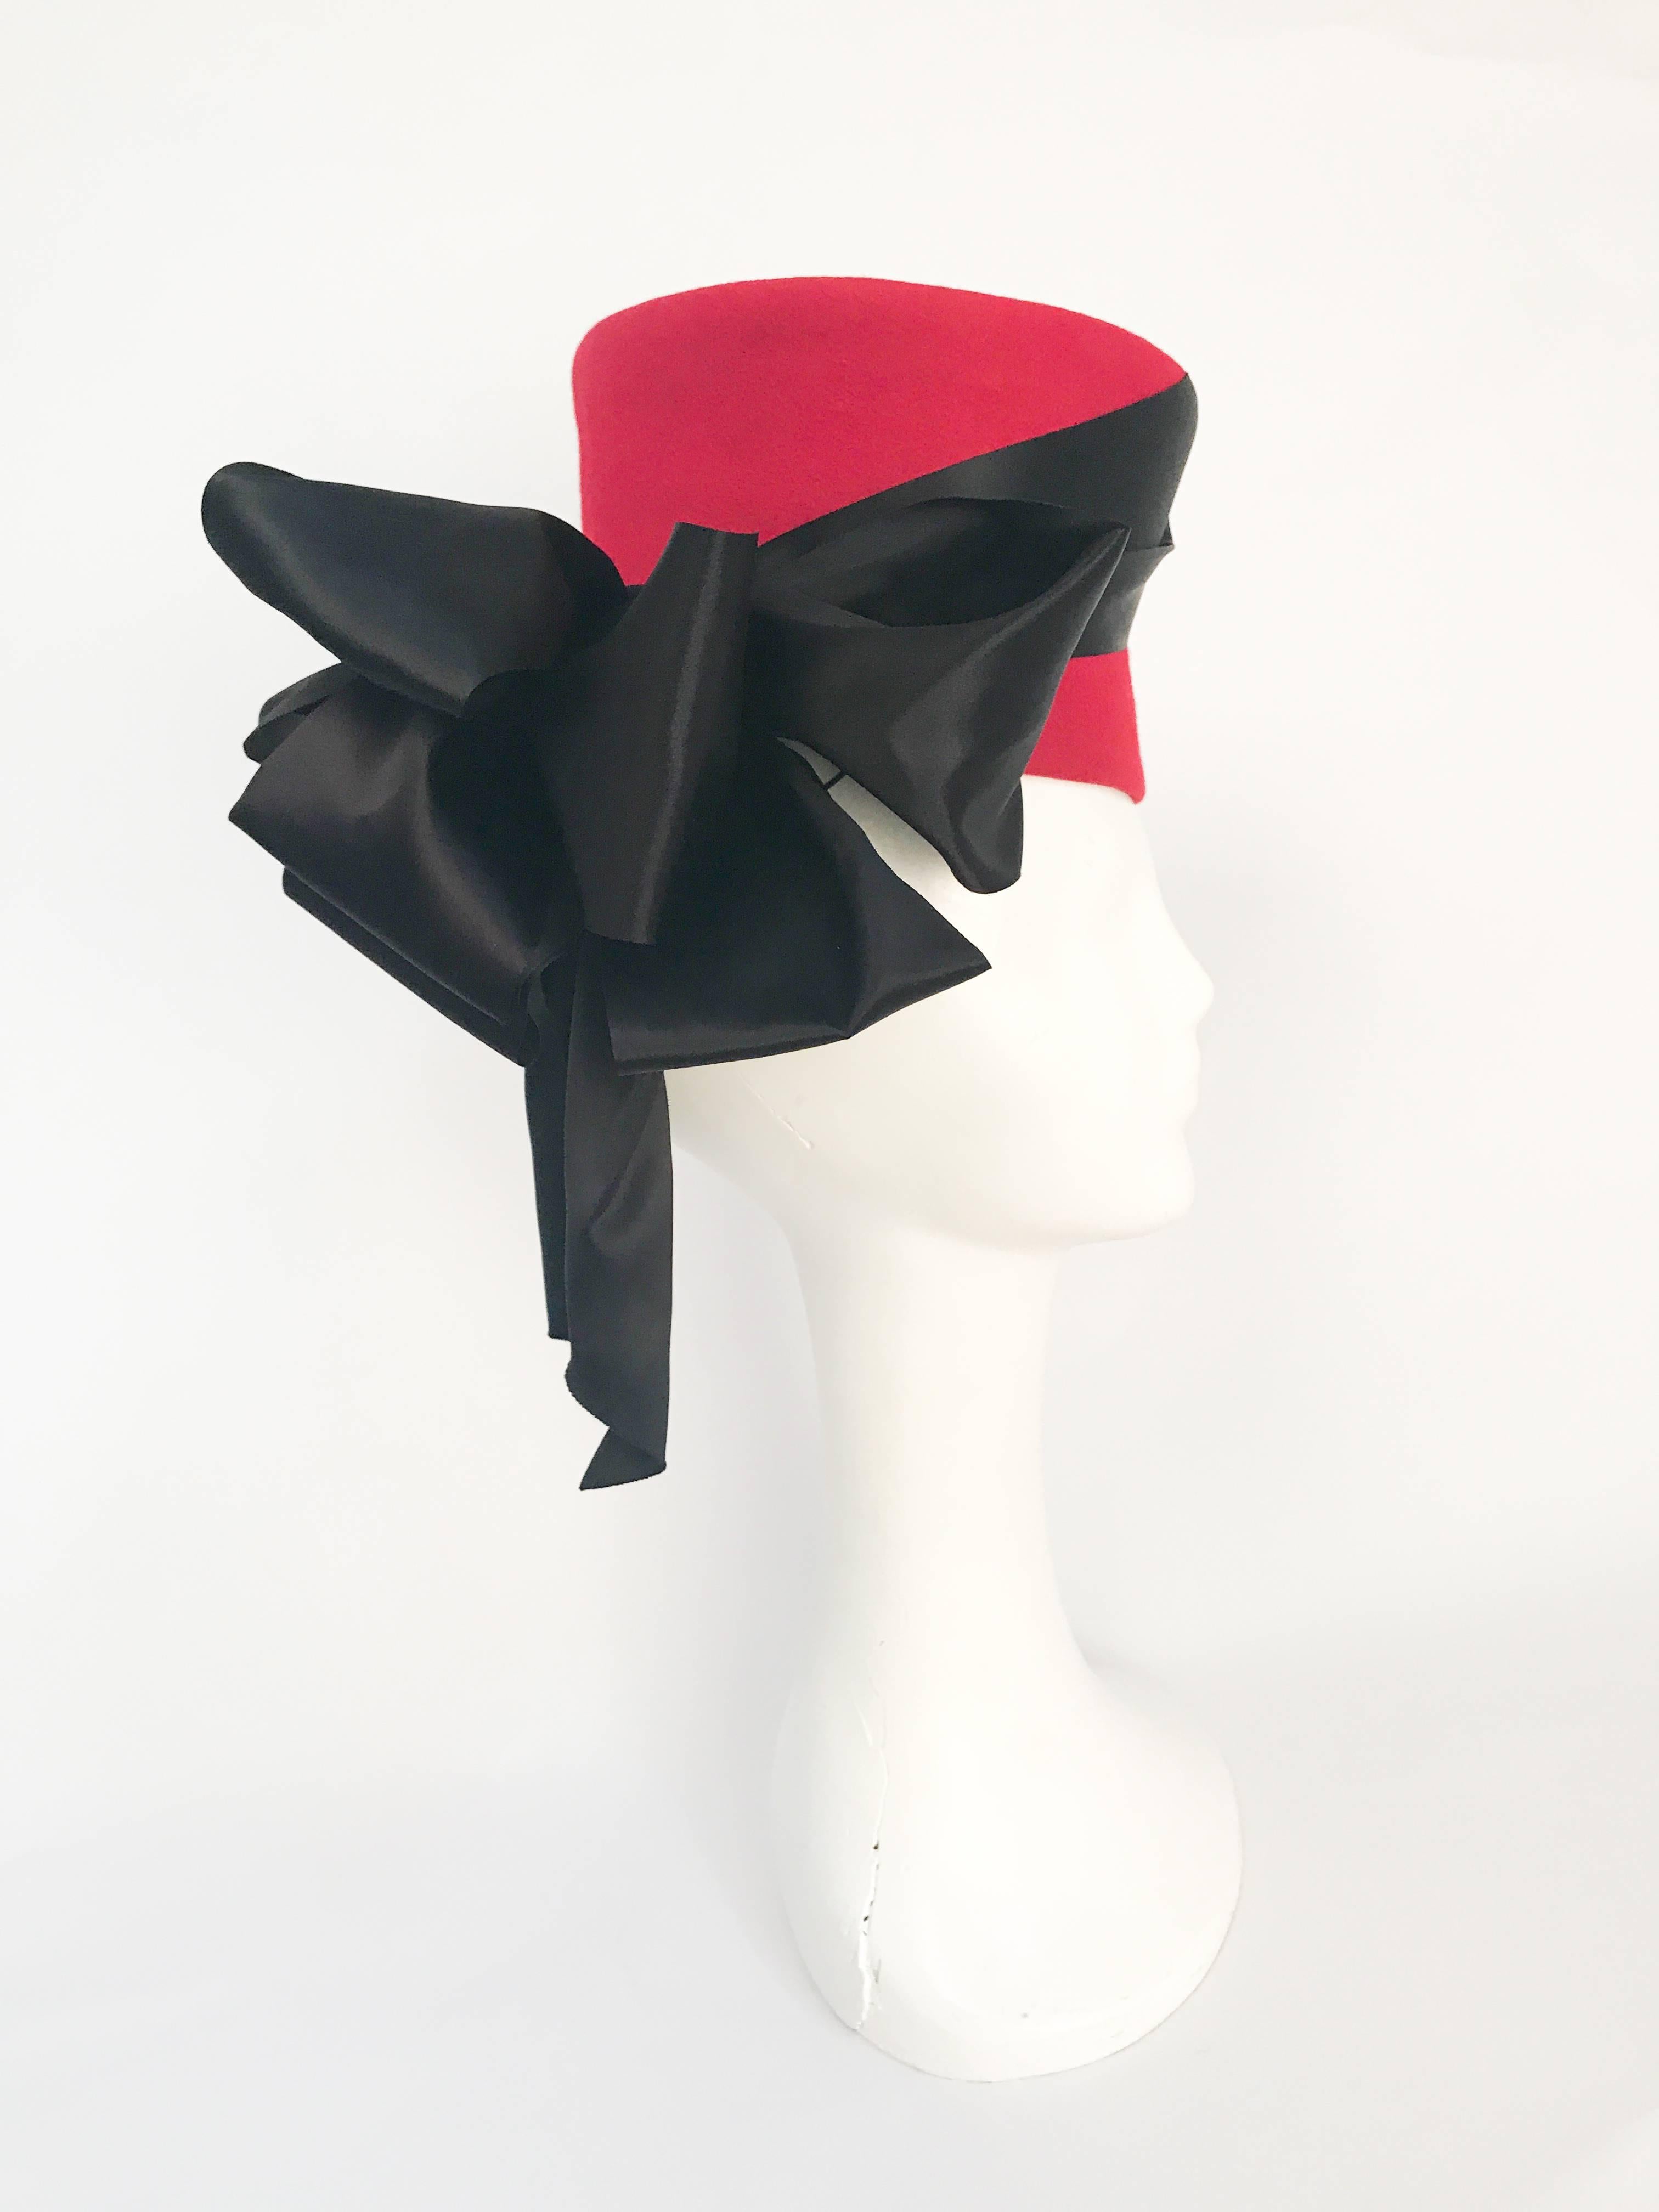 1940s Flora Weiler Rhubarb Red Tilt Hat with Satin Ribbon. Red tilt hat with black satin ribbon and exaggerated bow. Elastic provide to secure hat to head.